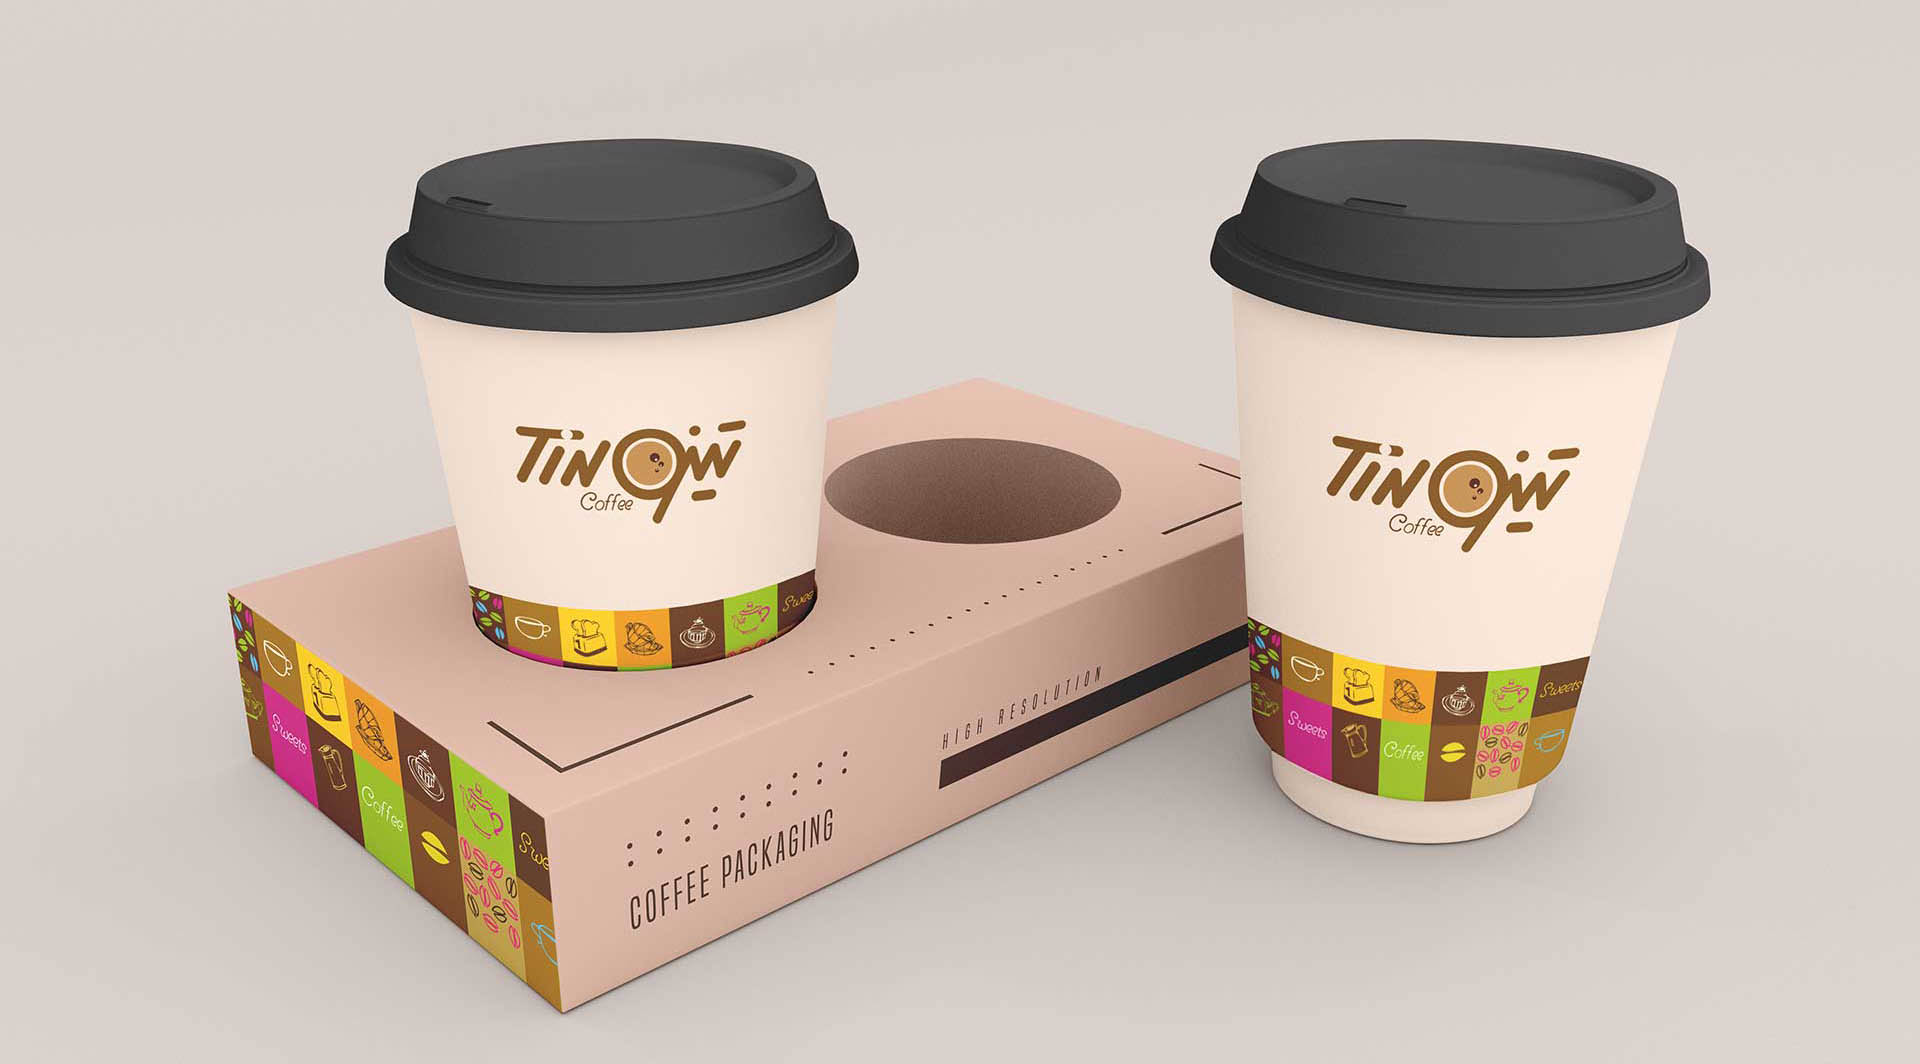 Disposable coffee cup with box mockup